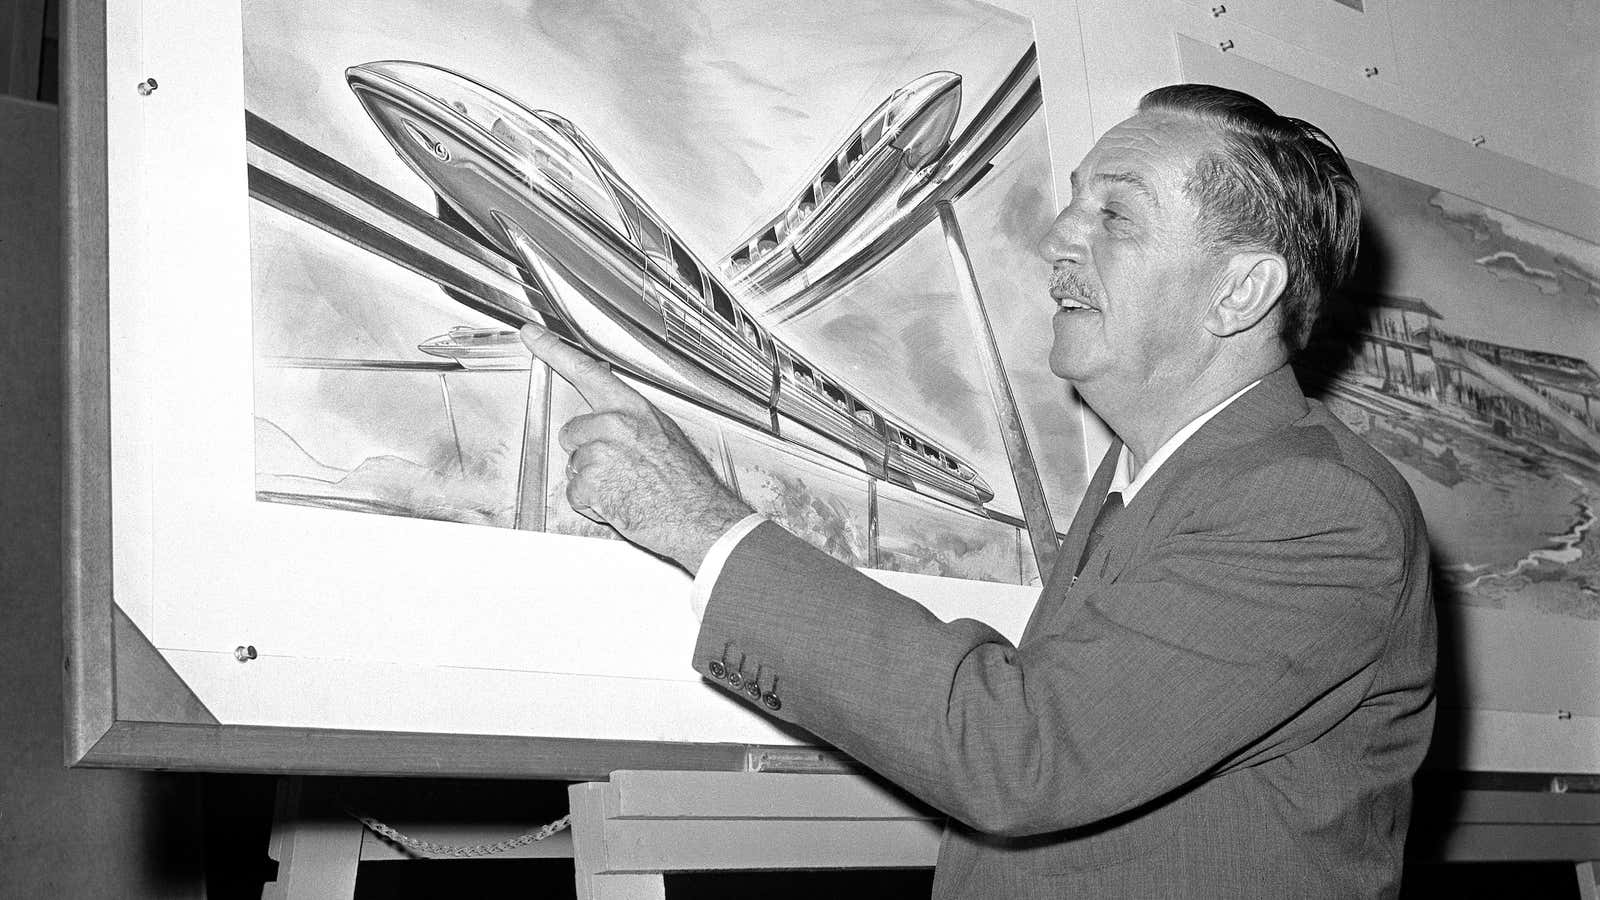 Southern California has had its share of futuristic public transit plans dating back to the Disneyland monorail system.